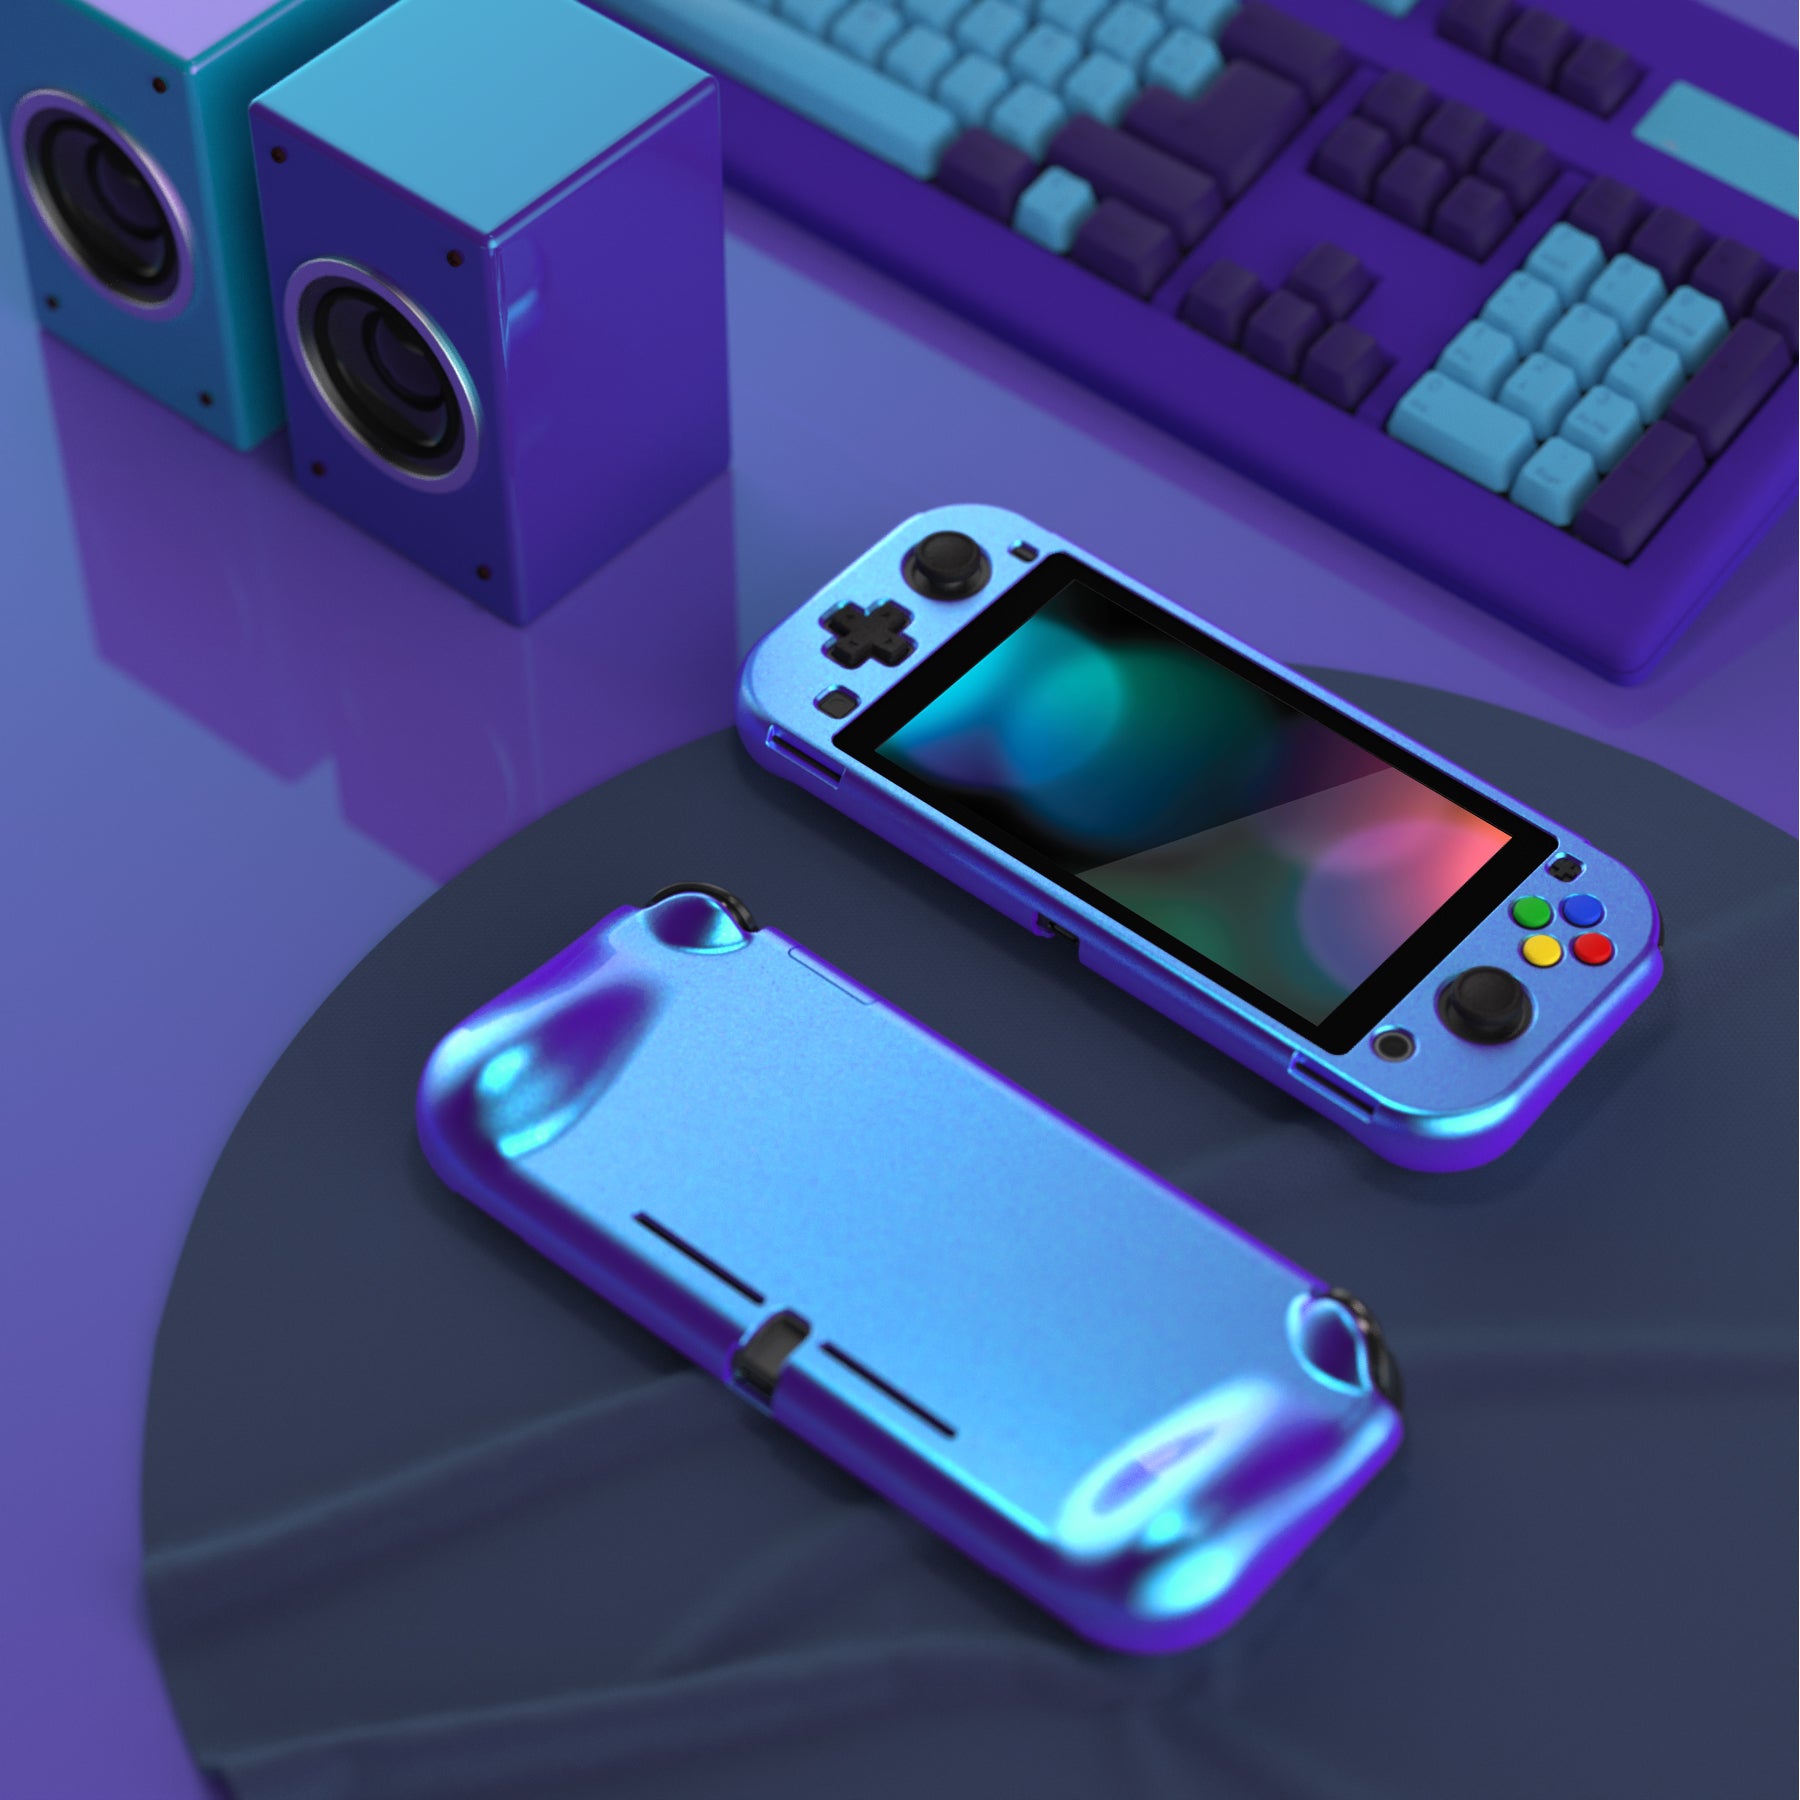 PlayVital ZealProtect Glossy Protective Case for Nintendo Switch Lite, Hard Shell Ergonomic Grip Cover for Switch Lite w/Screen Protector & Thumb Grip Caps & Button Caps - Chameleon Purple Blue - PSLYP3009 playvital